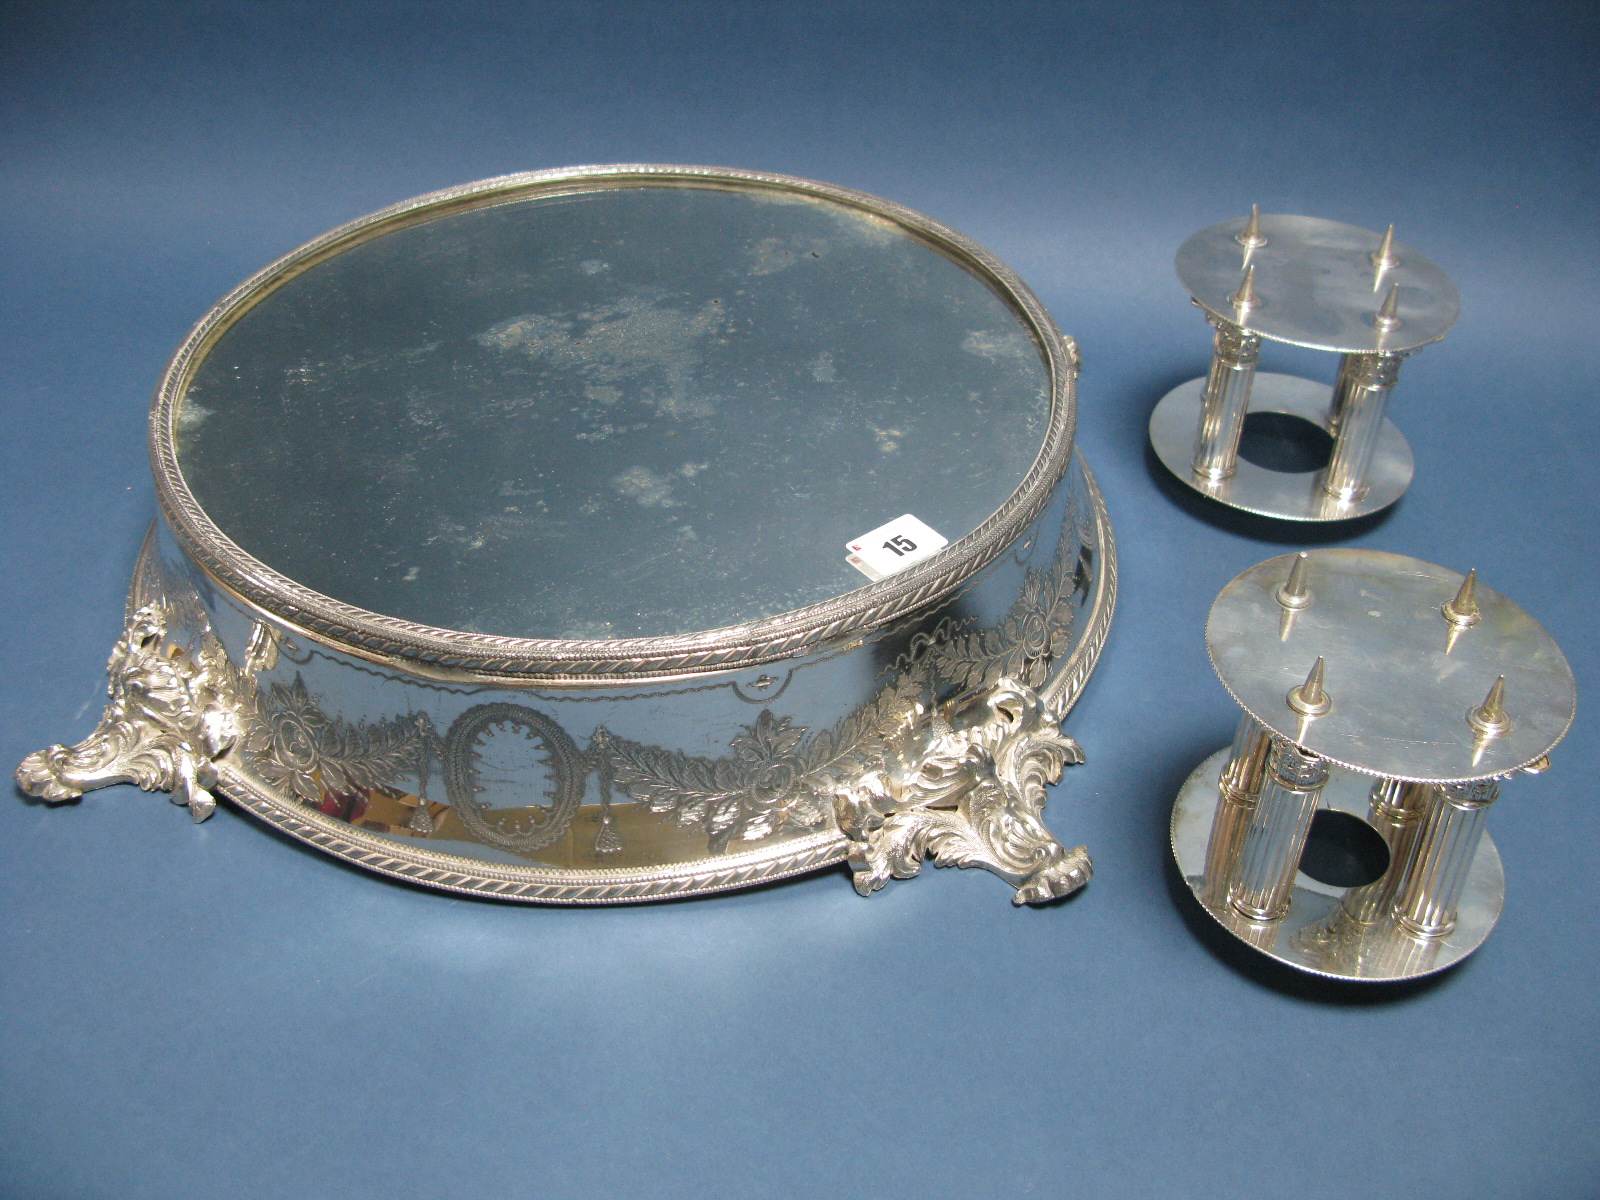 A Late XIX / Early XX Century Plated Wedding Cake Stand, with mirrored plateau, within a ribbon tied